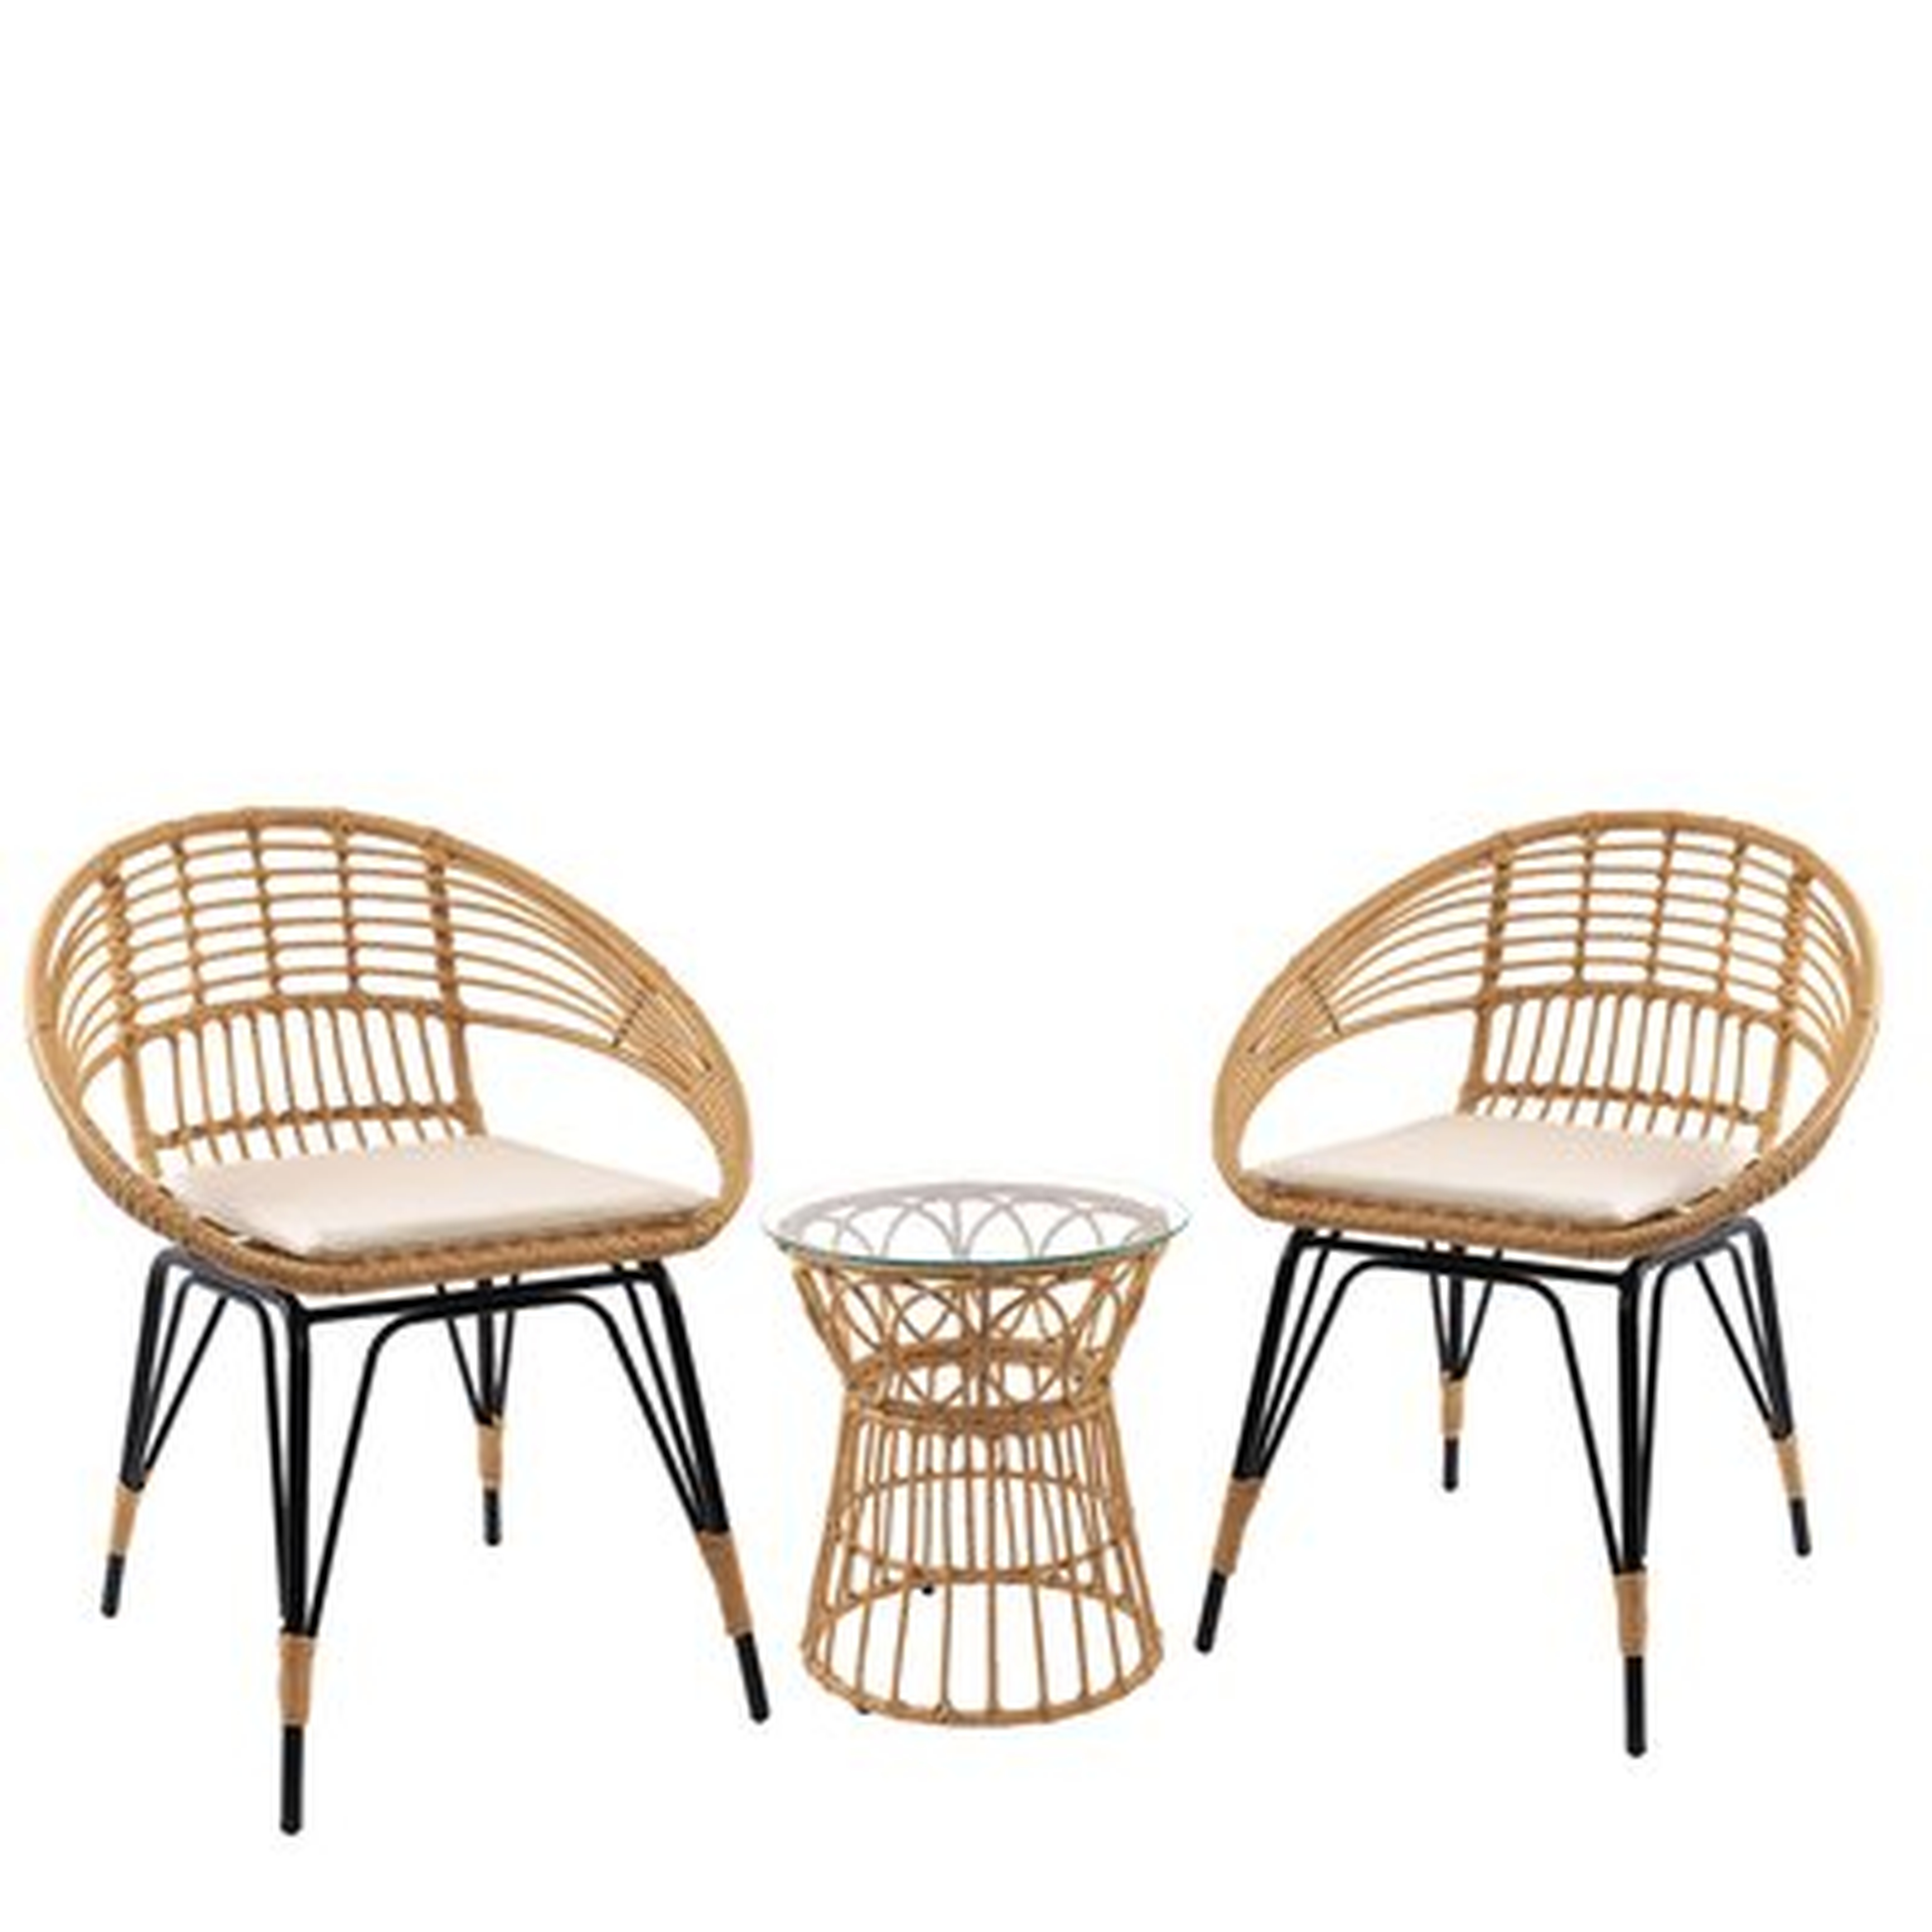 Wicker/Rattan 2 - Person Seating Group With Cushions - Wayfair